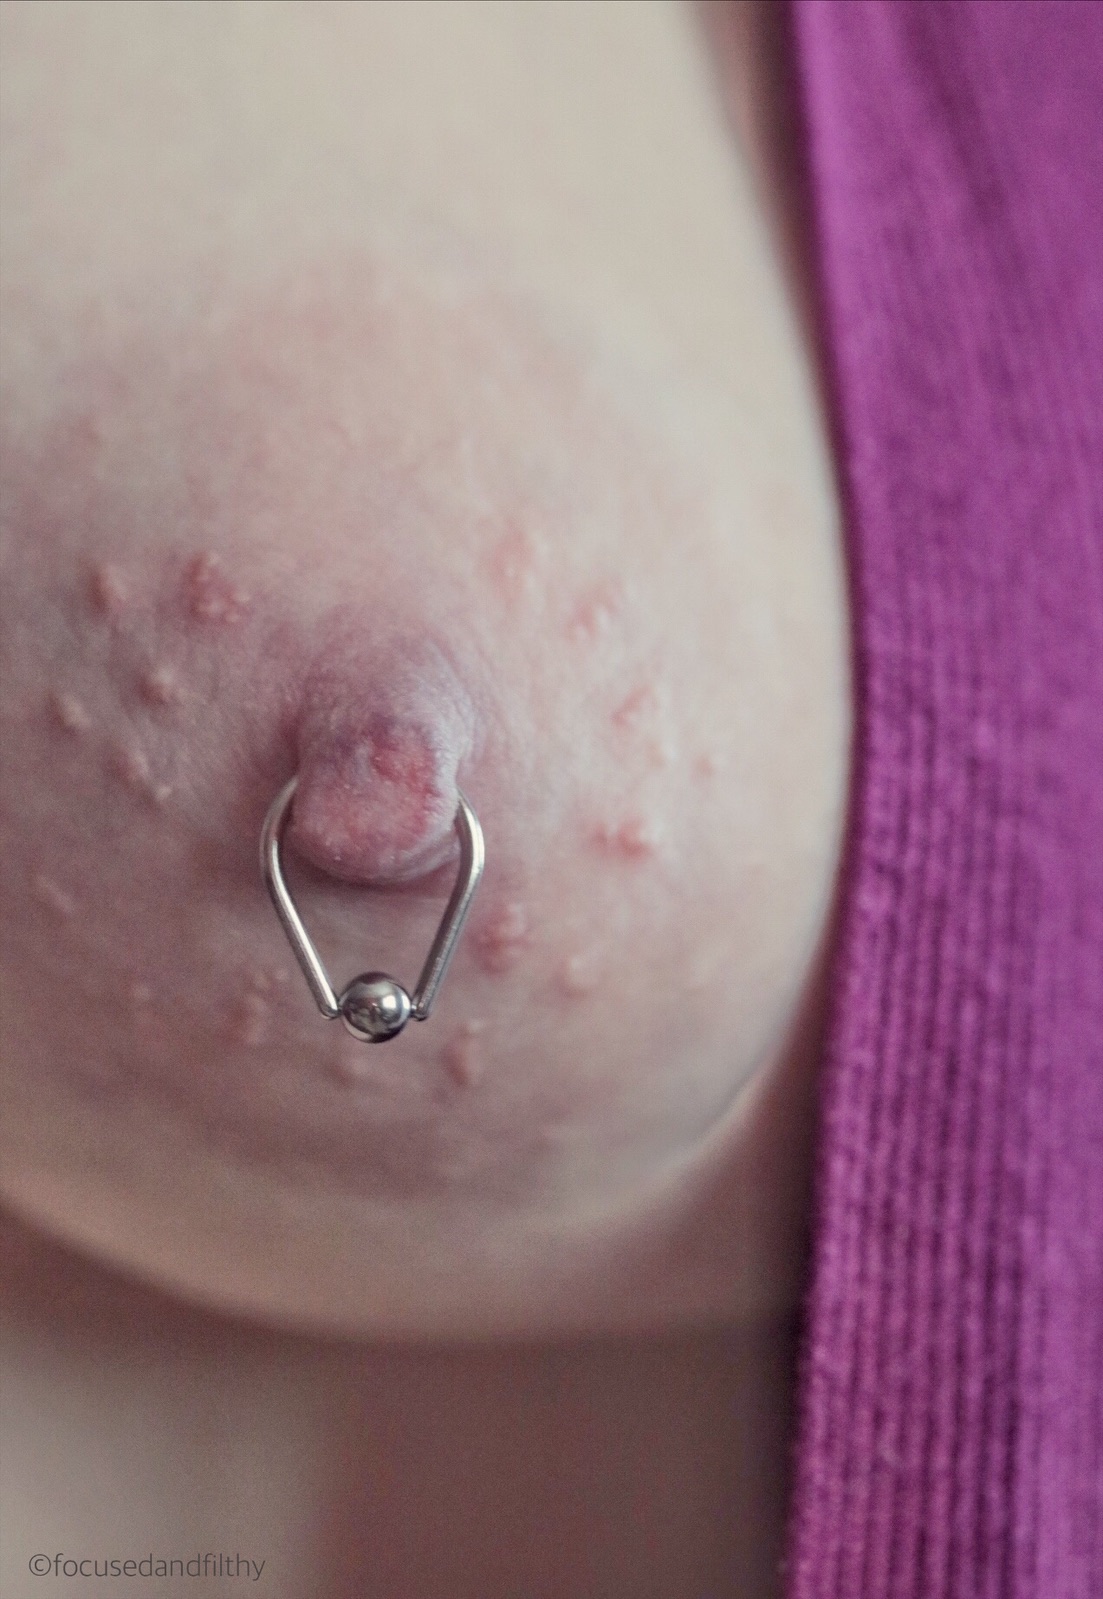 Close up colour photograph of a left nipple with a teardrop shaped nipple ring piercing. There is a bright pink cardigan seen to one side too  